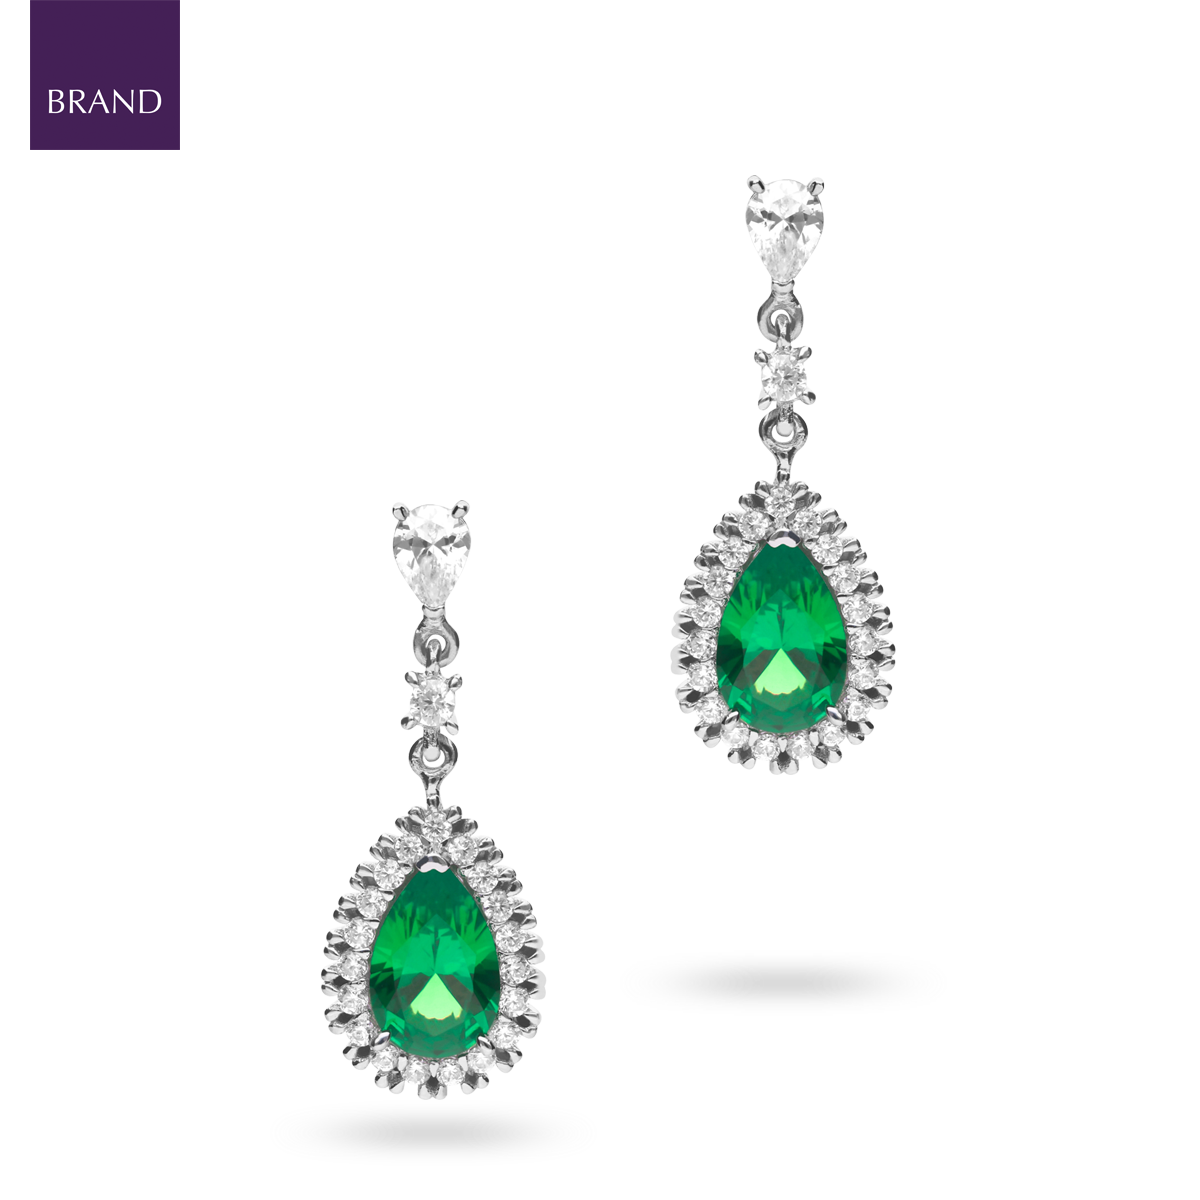 Sterling Silver Teardrop Green Cubic Zirconia With Pave Surround Drop Earrings